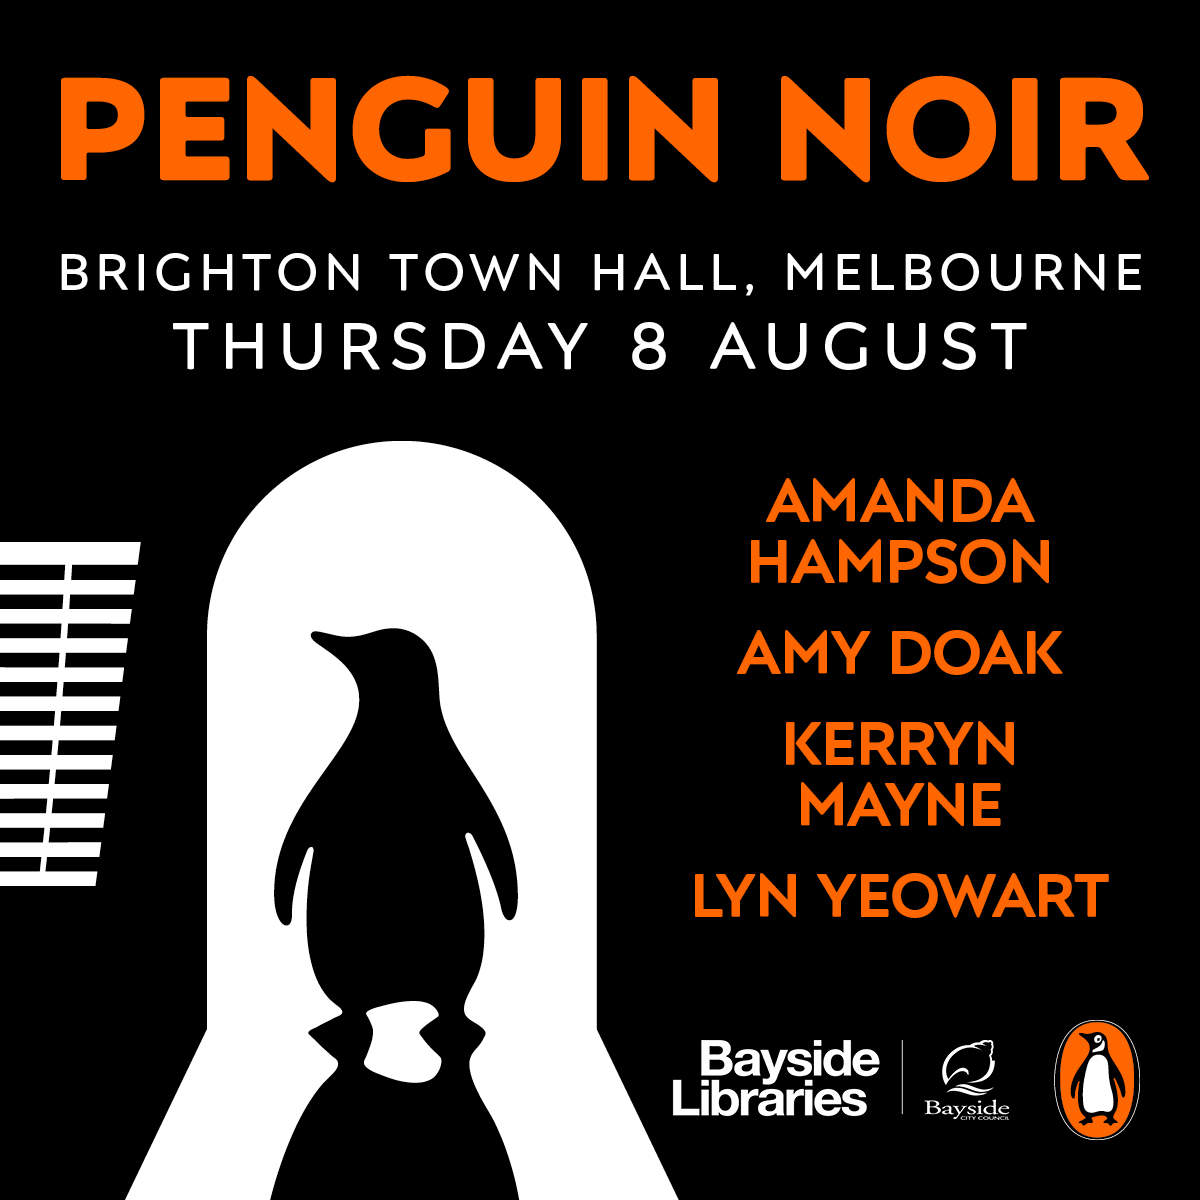 A black and orange graphic with text that reads Penguin Noir, Brighton Town Hall, Melbourne Thursday 8 August